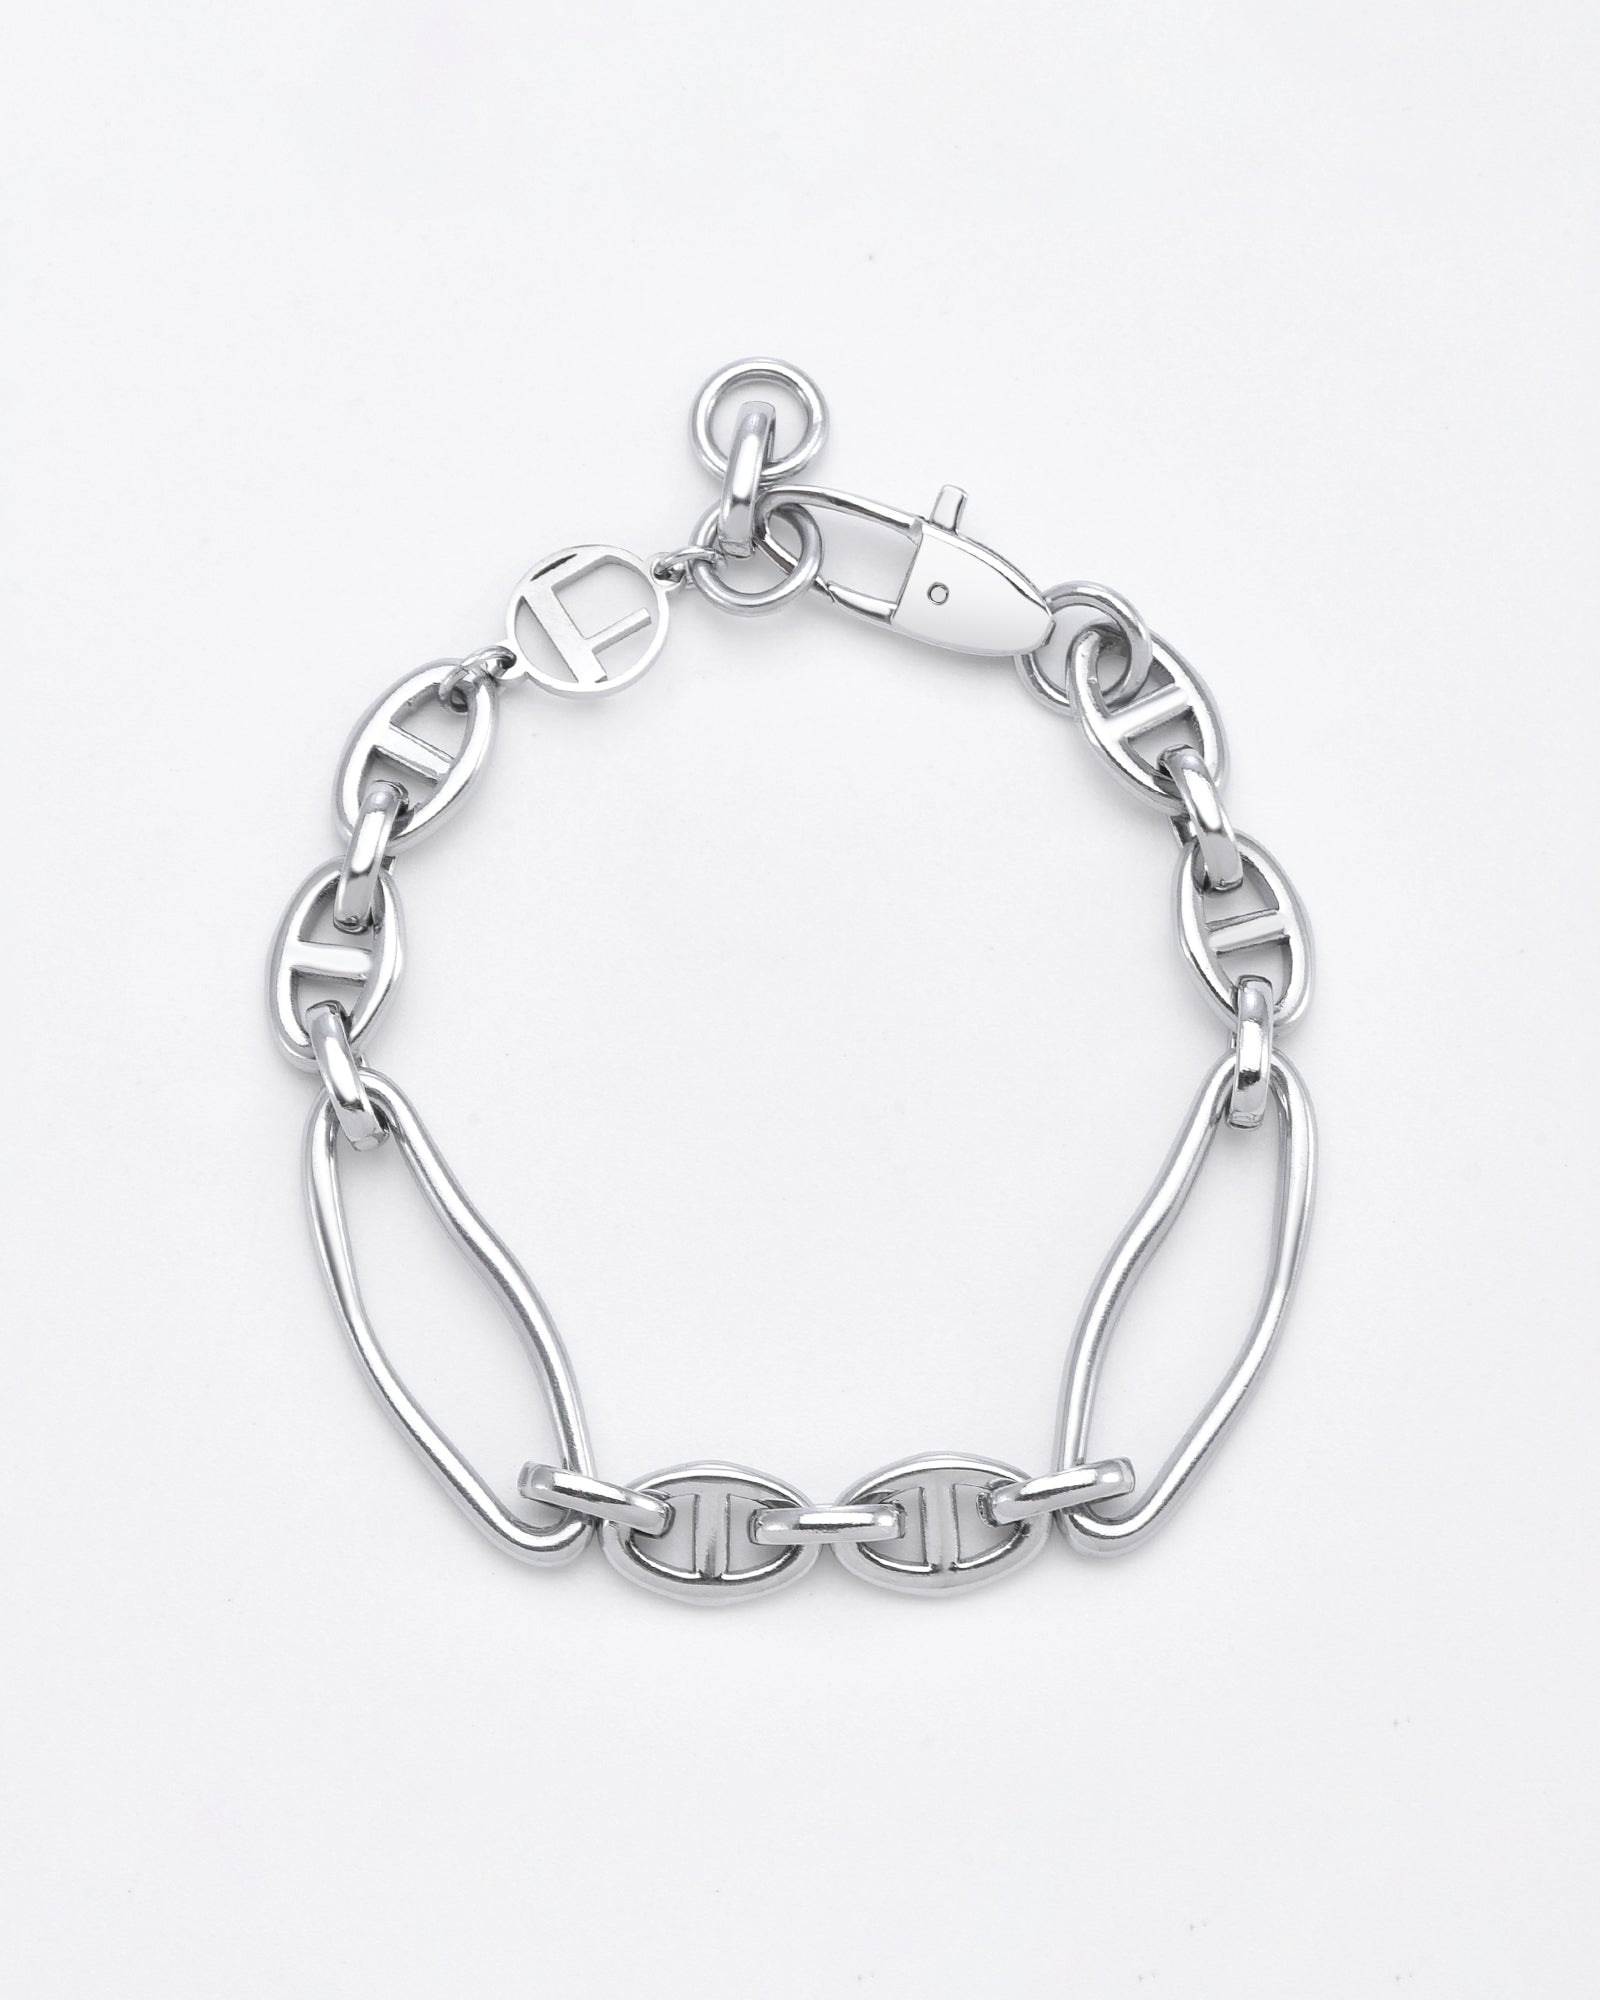 A stylish **Portrait Bracelet Silver** featuring a combination of large and small interlinked oval-shaped chain links. This hypoallergenic piece by **For Art's Sake®** boasts a lobster clasp with a circular charm attached near the closure, all set against a plain white background.